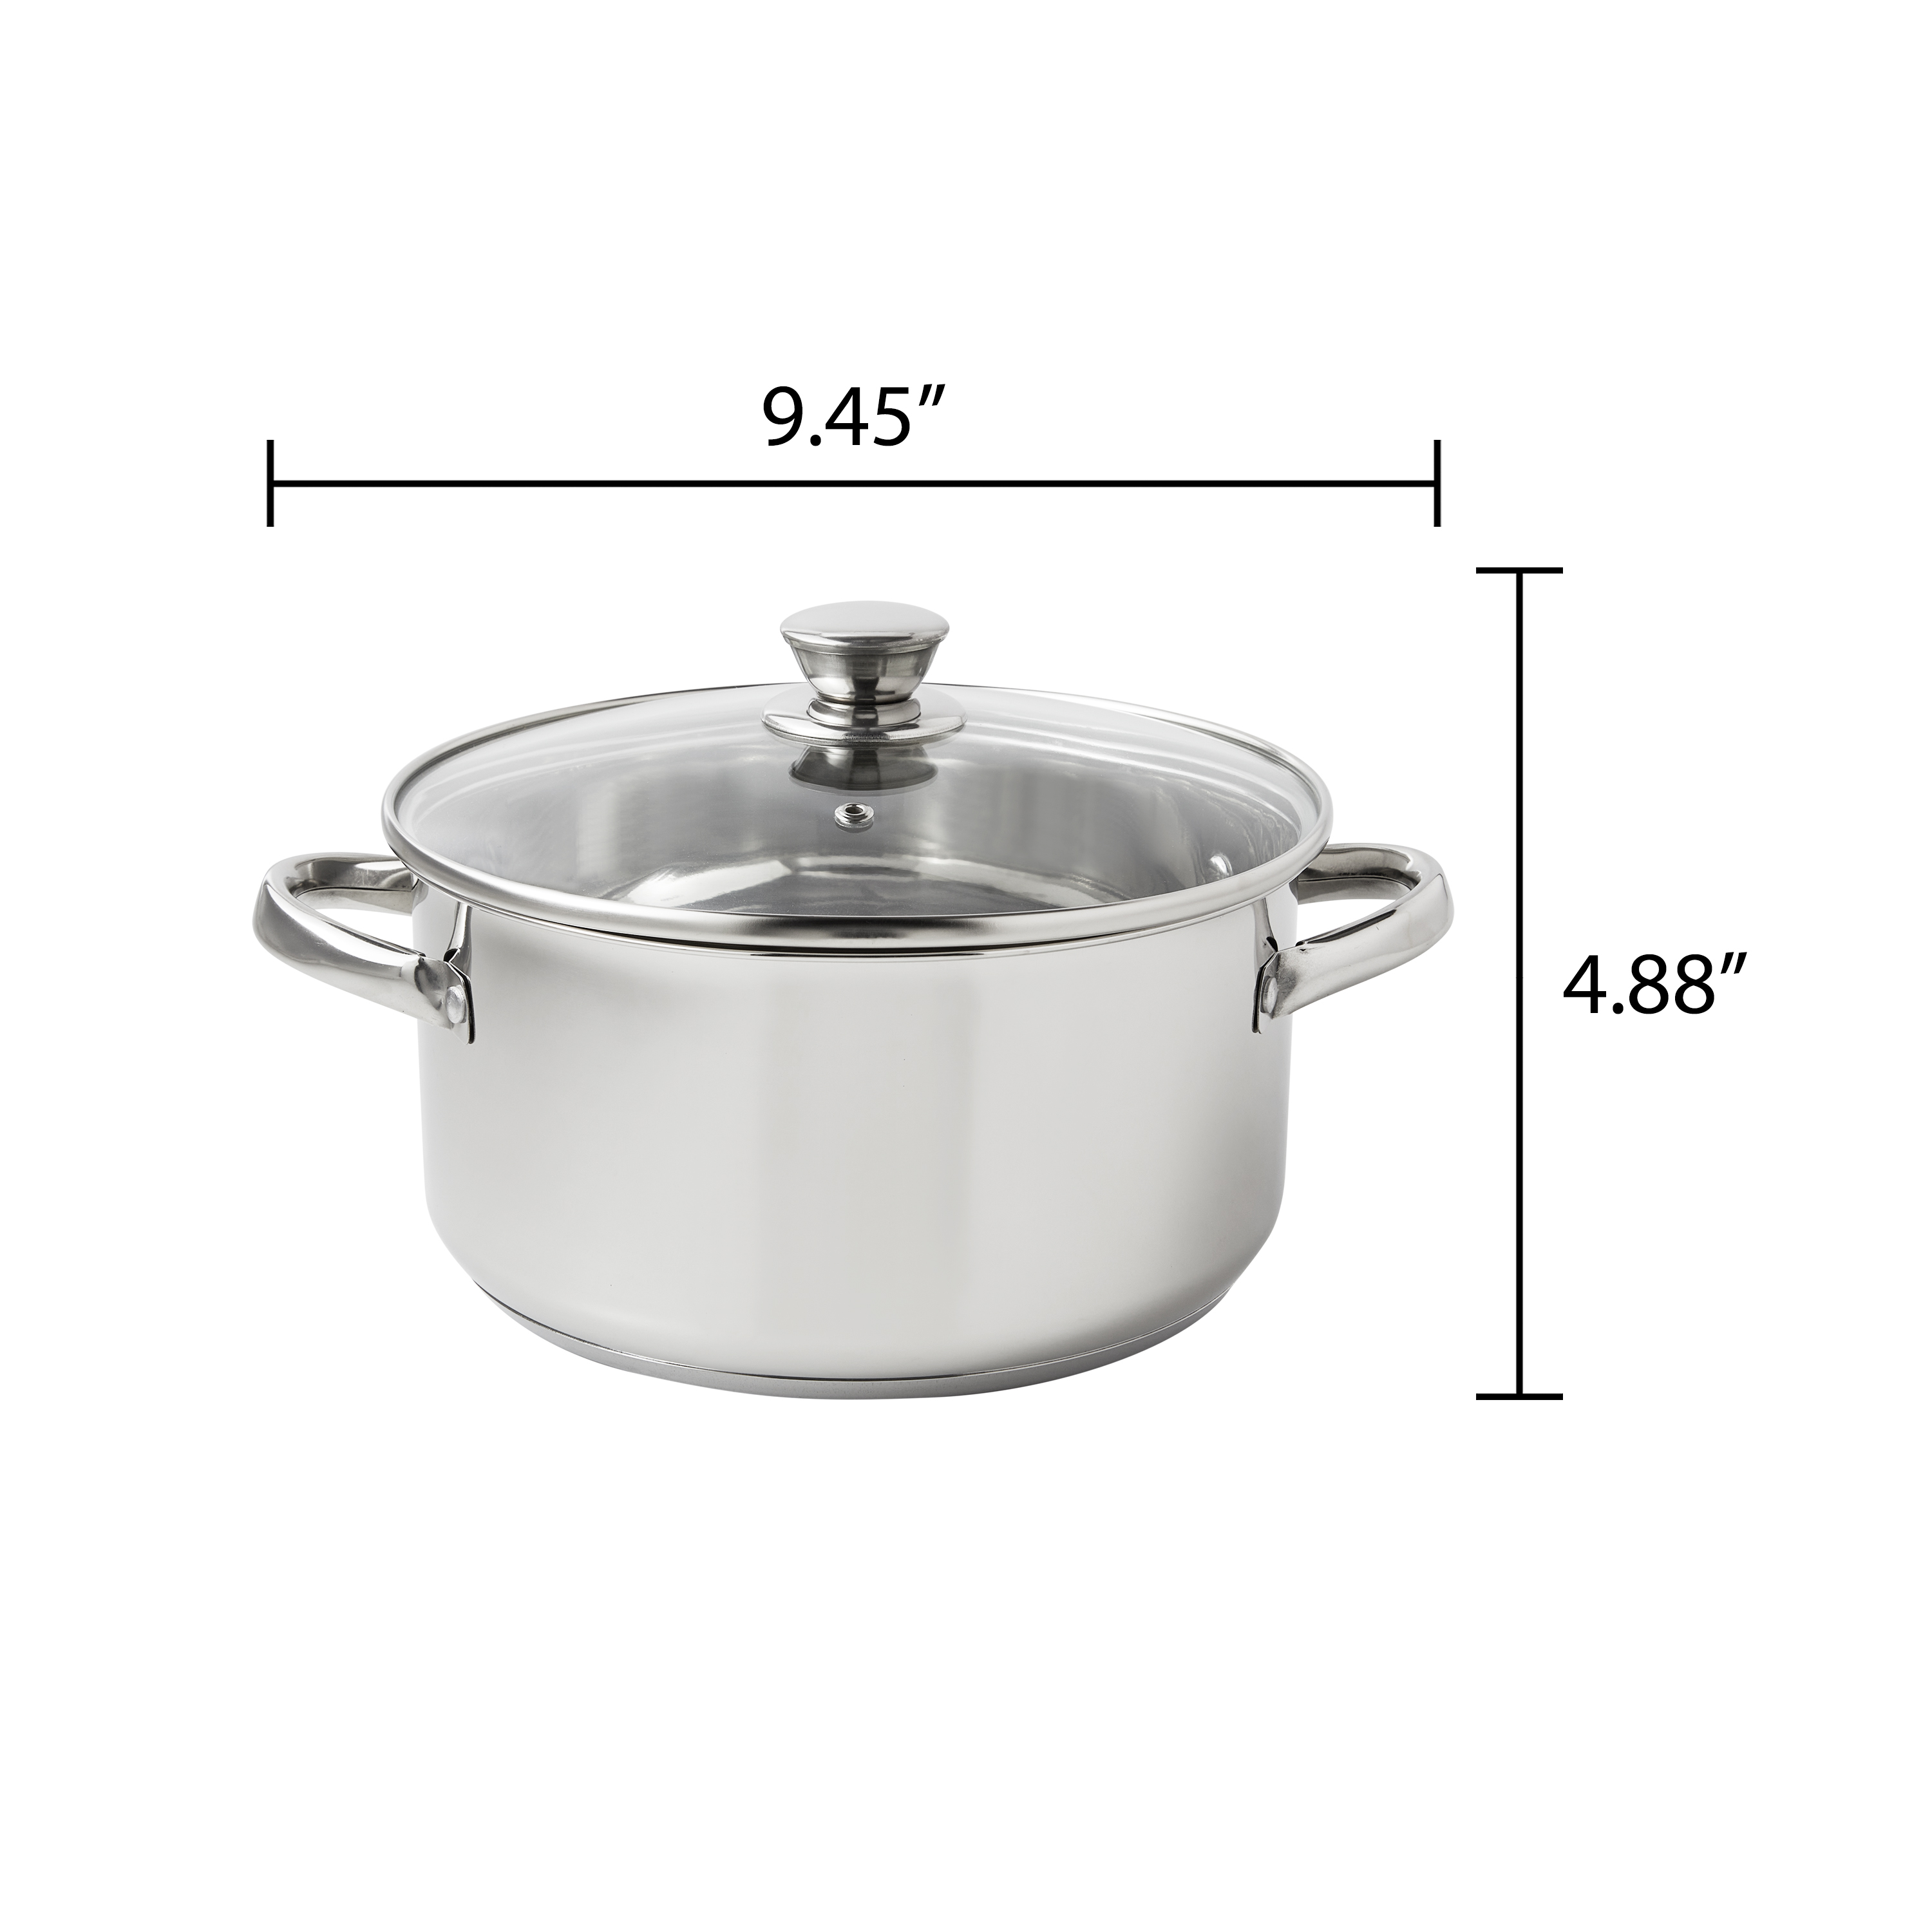 Mainstays Stainless Steel 5-Quart Dutch Oven with Glass Lid - Walmart.com